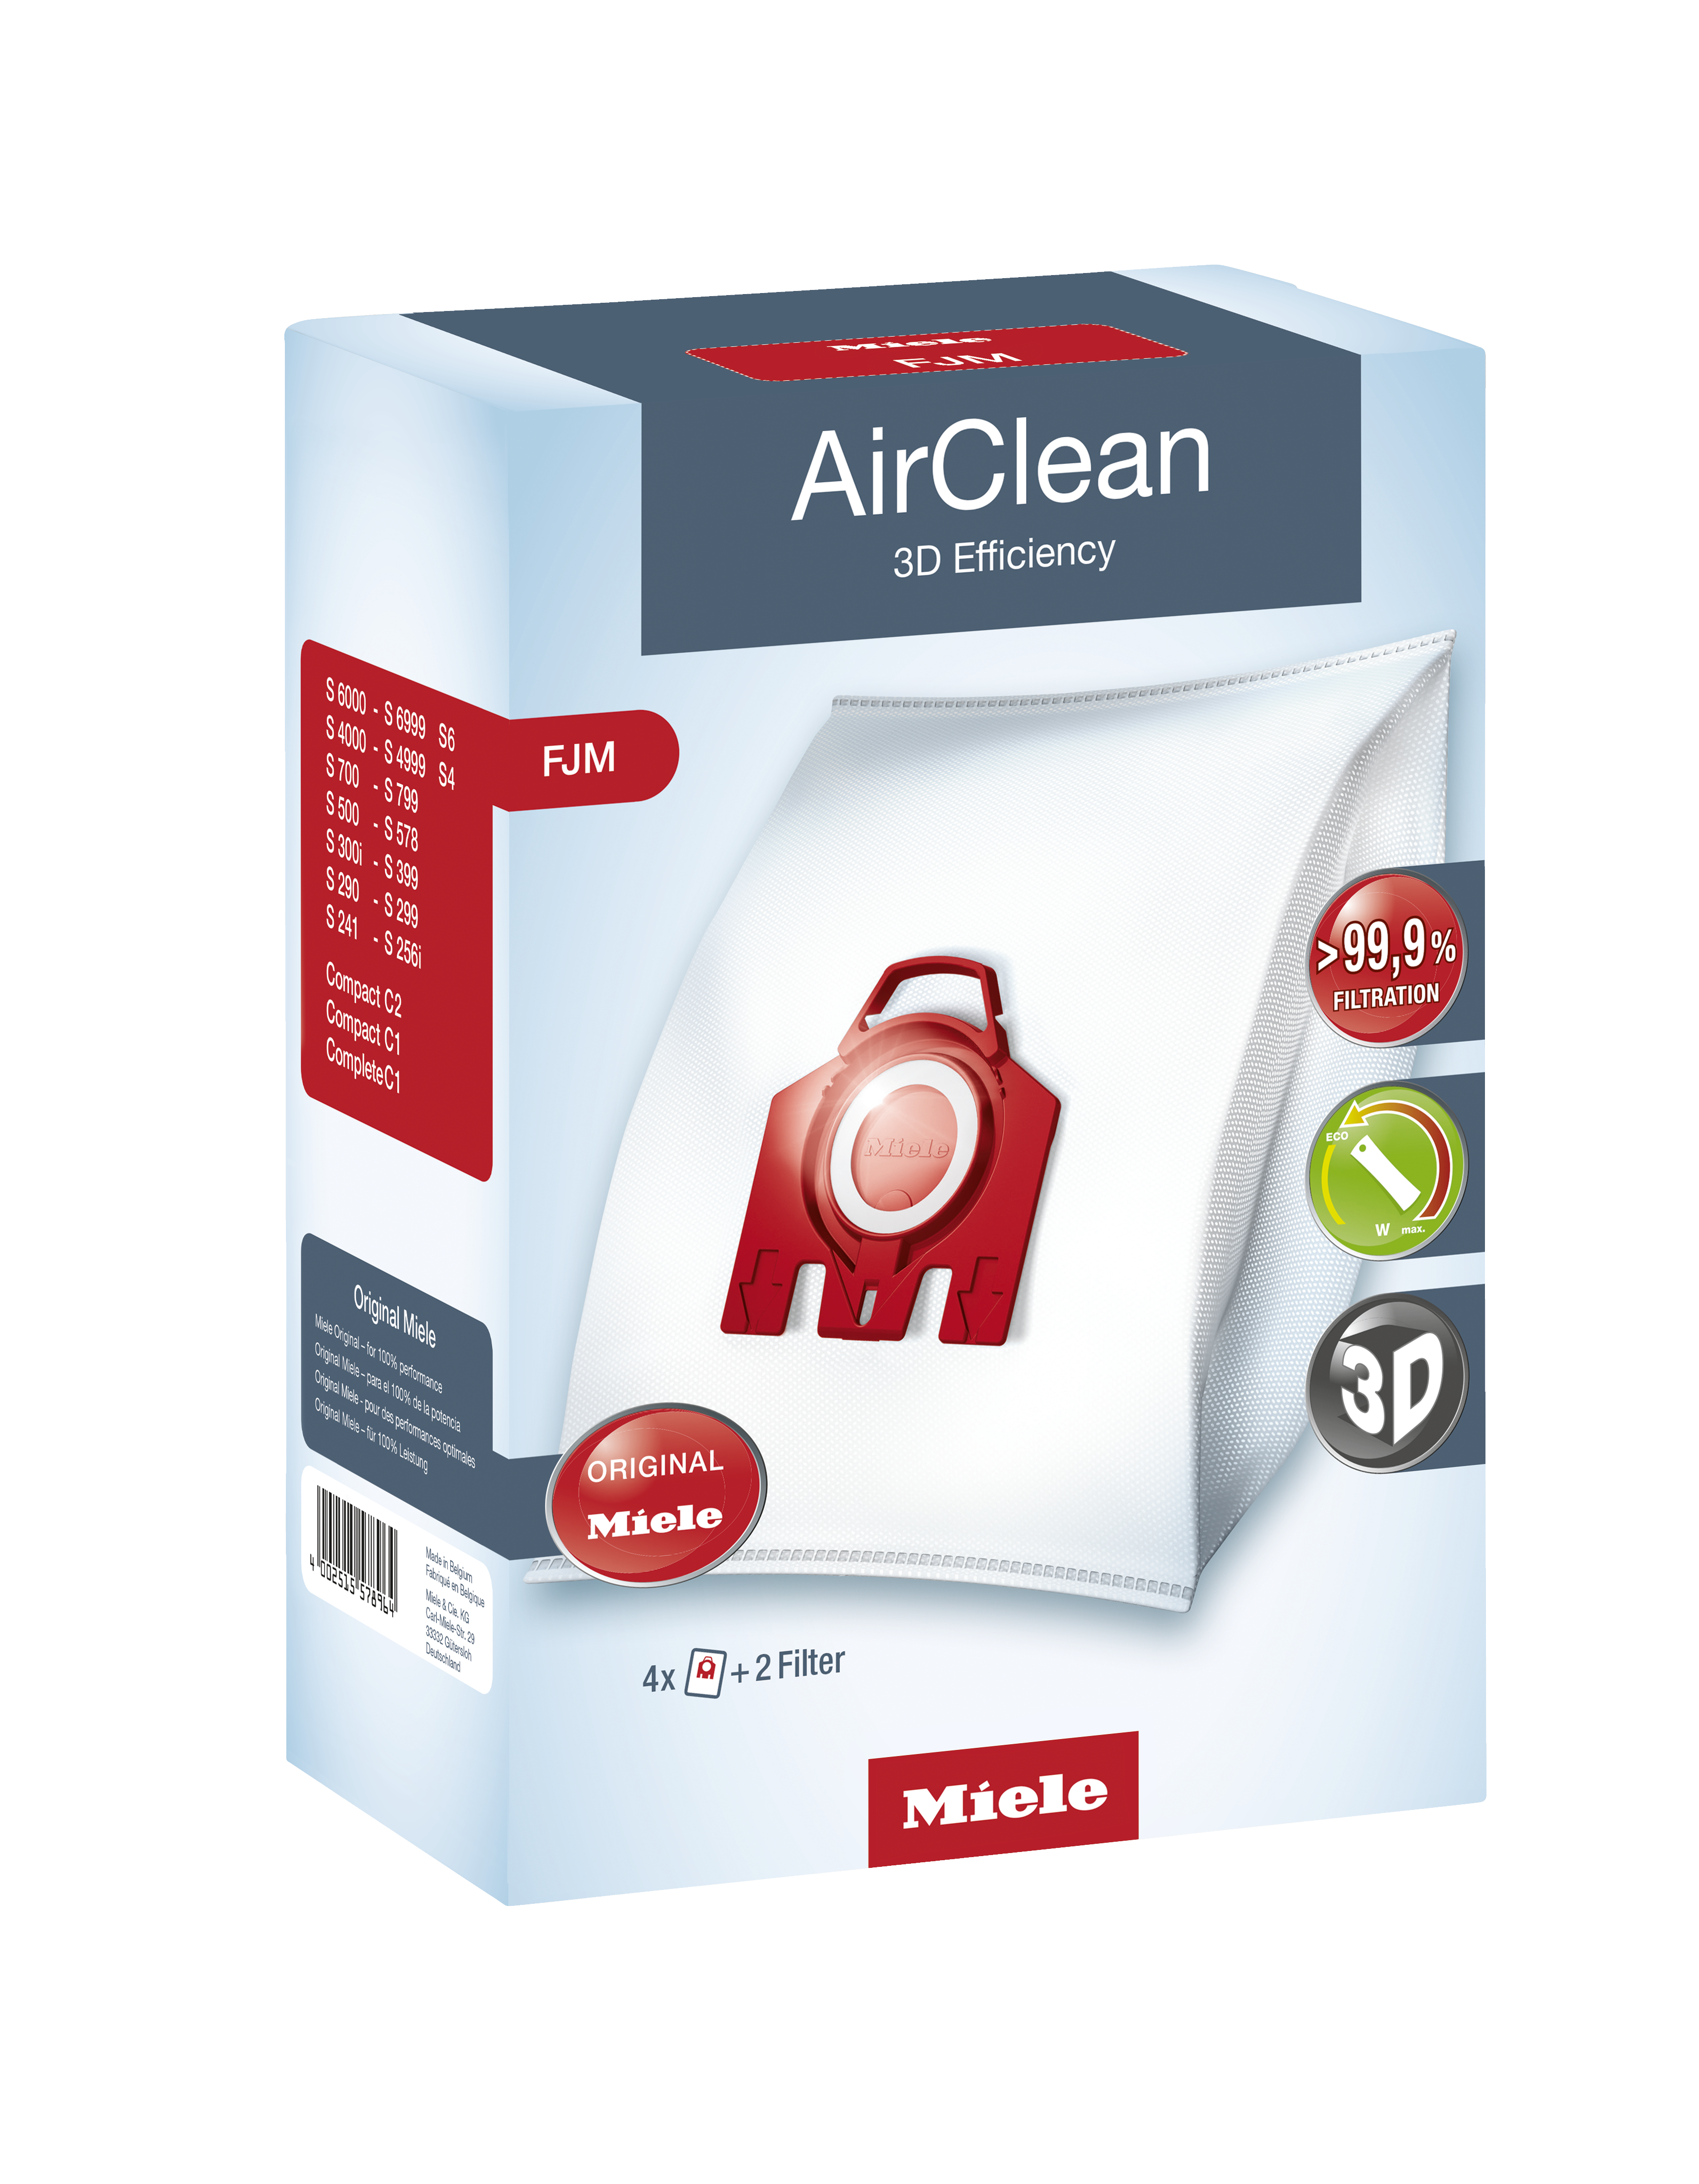 10 Allergen Vacuum Bags for Miele Style FJM+Filters & AH-30 HEPA 3D Technology 